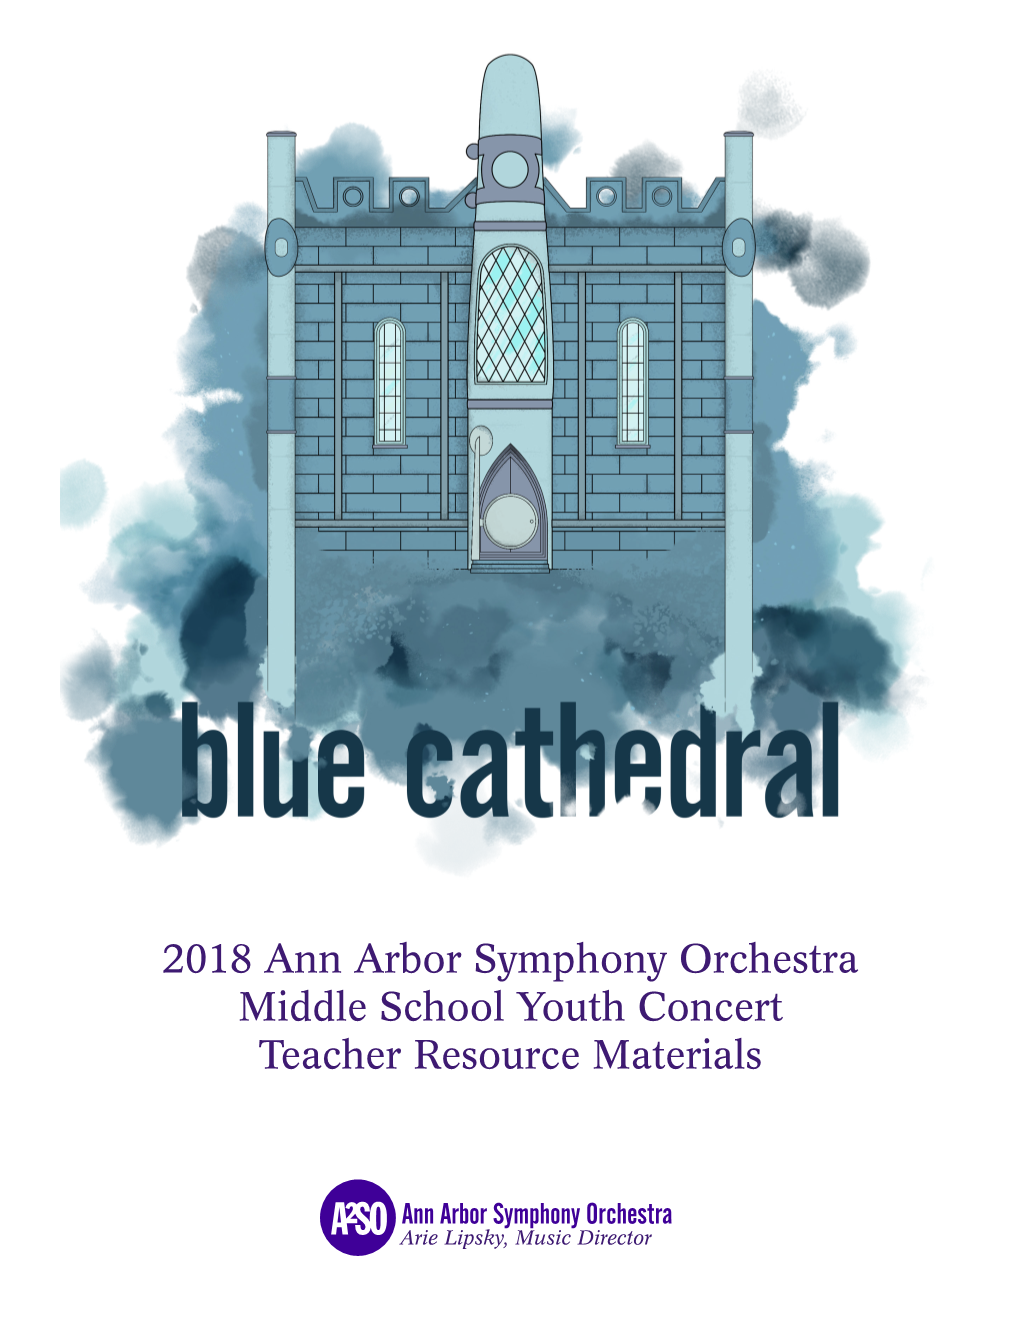 2018 Ann Arbor Symphony Orchestra Middle School Youth Concert Teacher Resource Materials